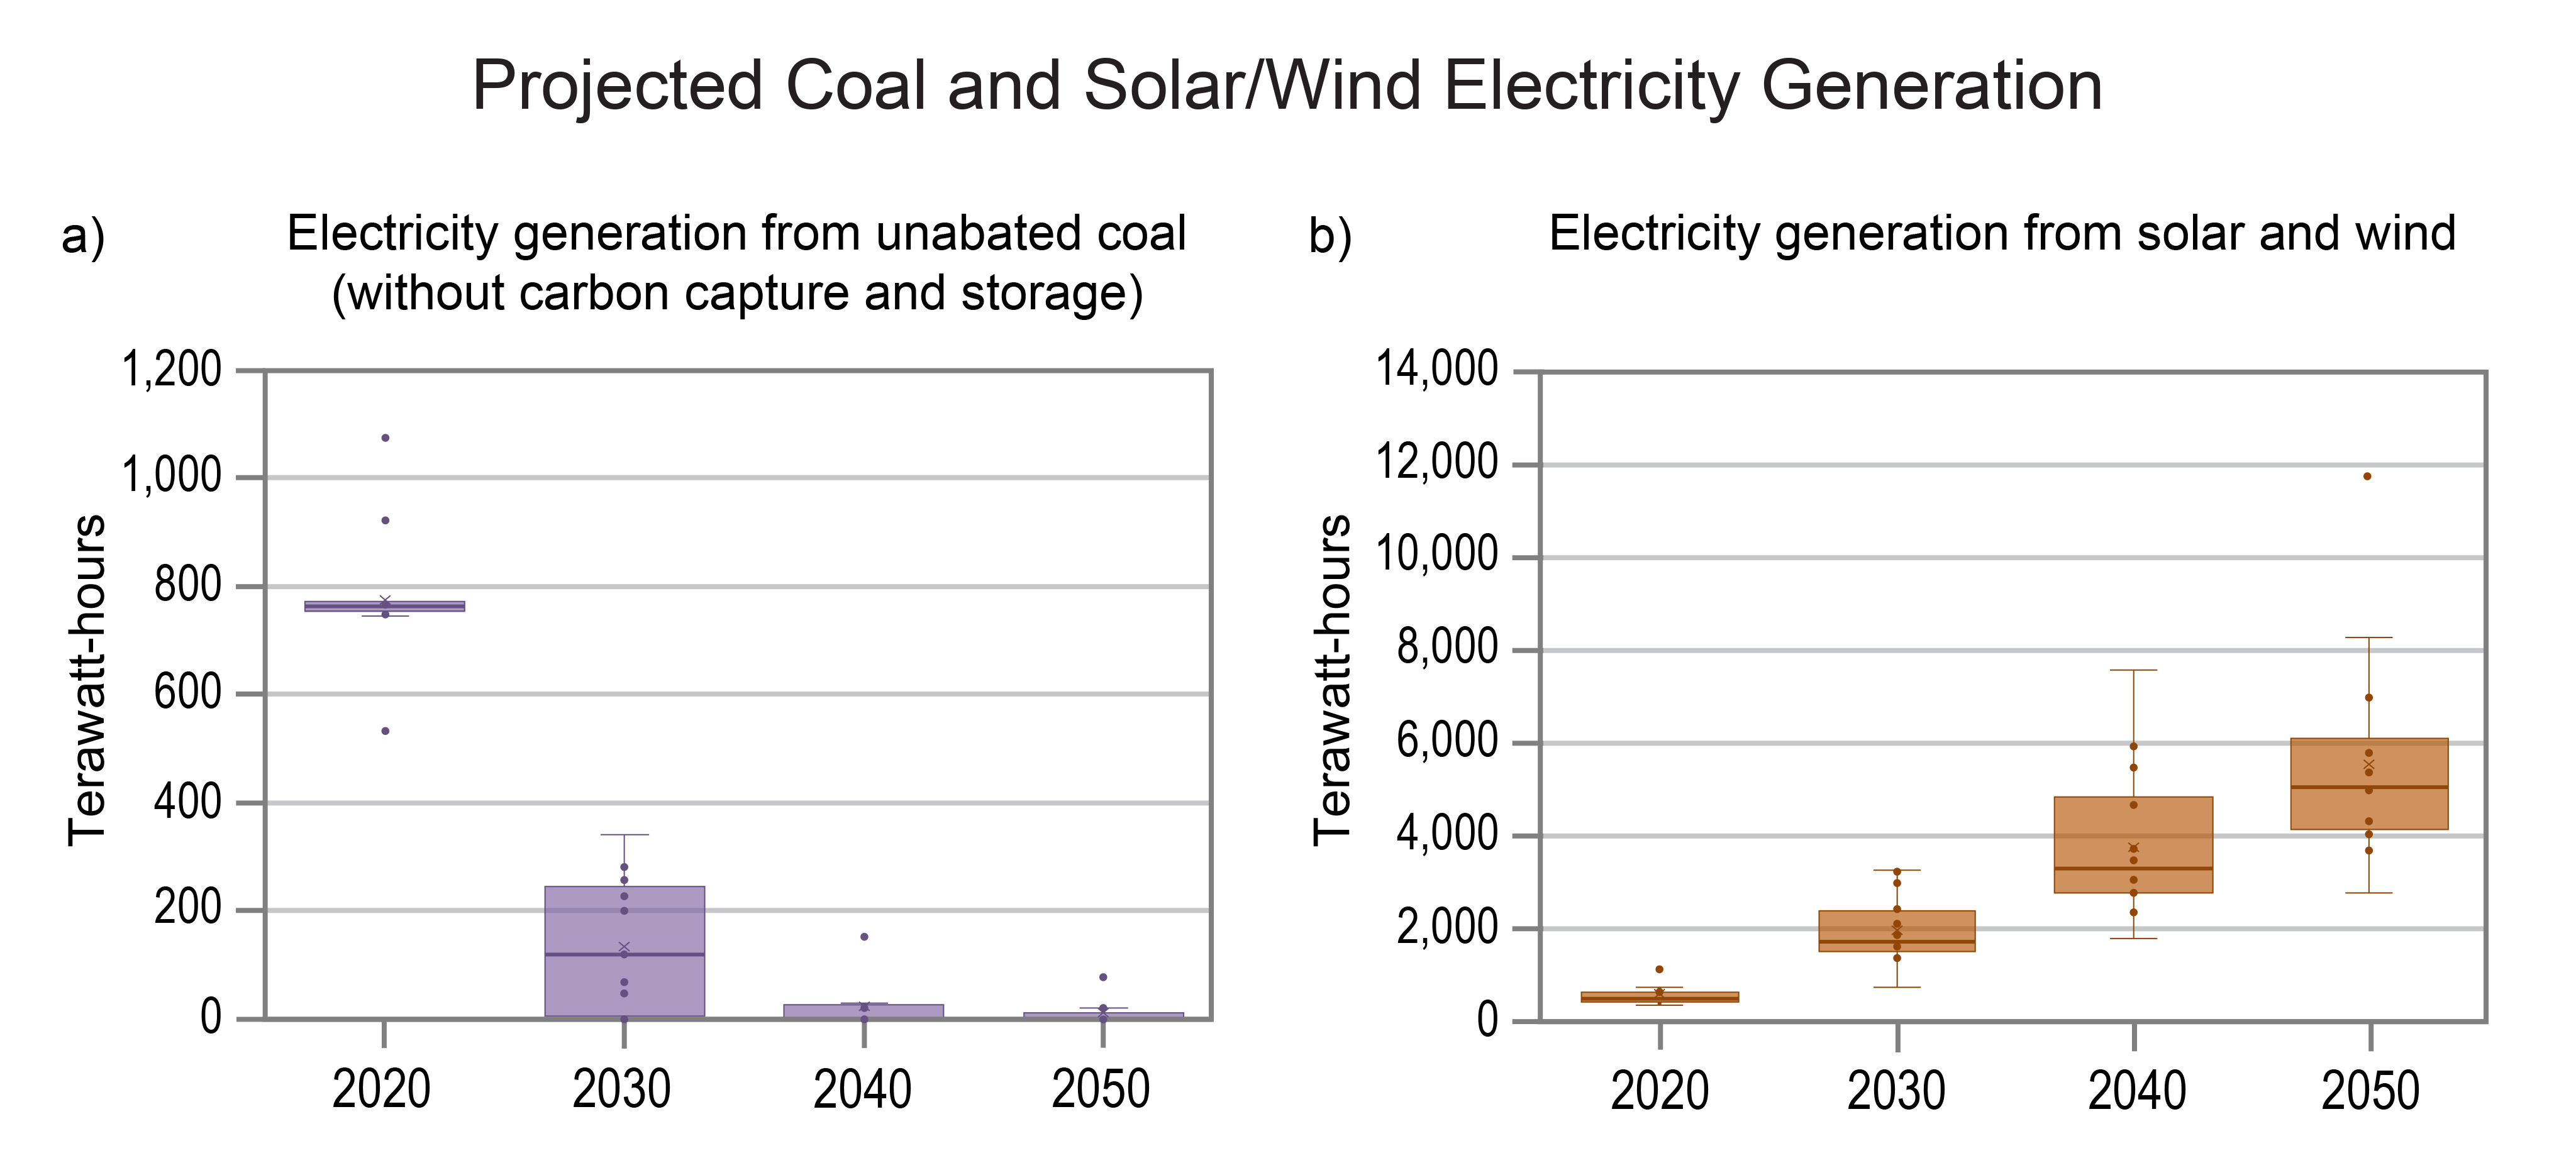 Projected Coal and Solar/Wind Electricity Generation